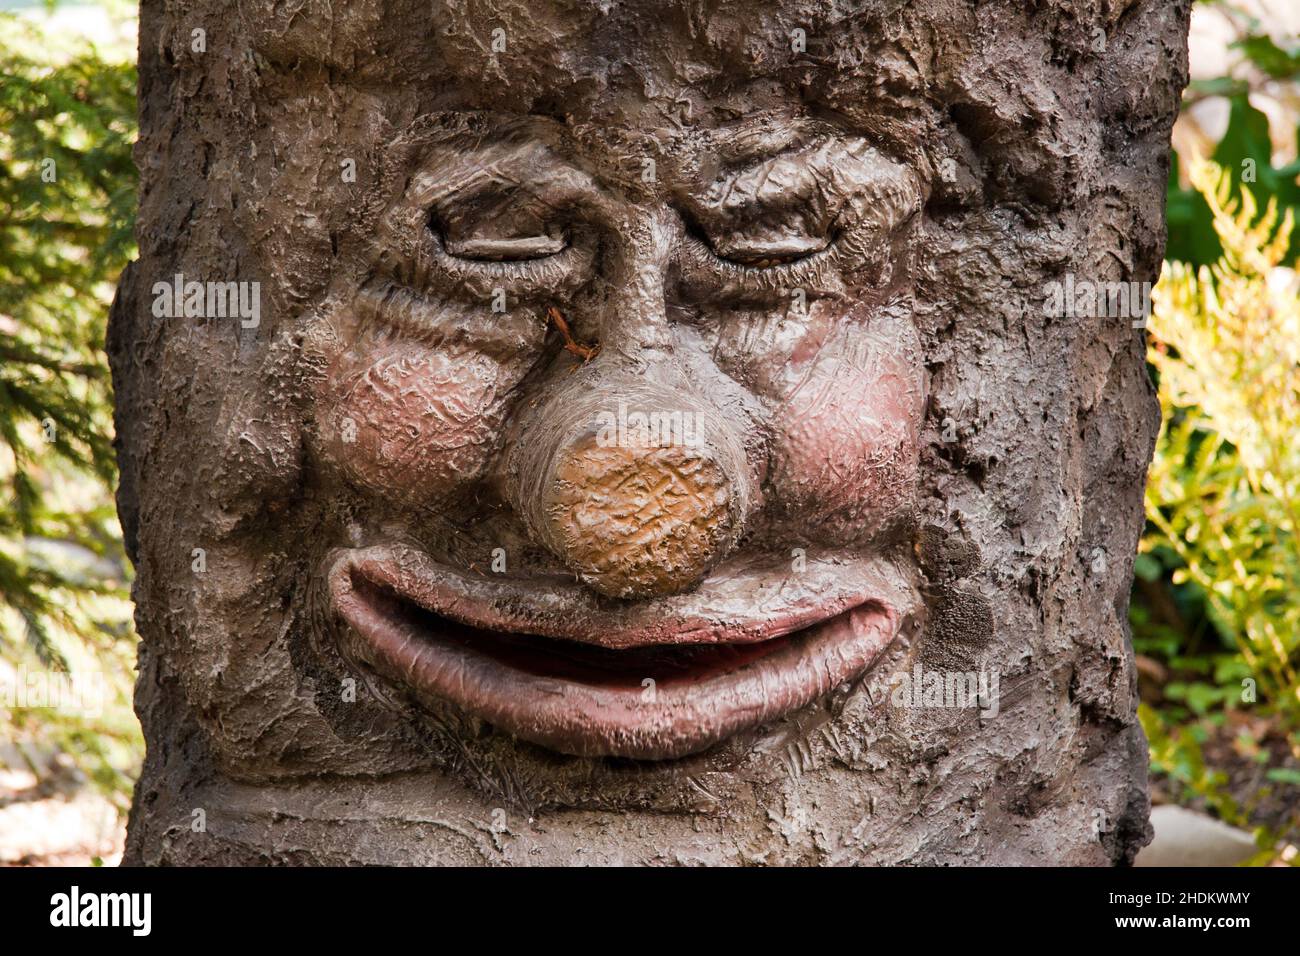 tree trunk, mythical creatures, trunks, mythical creature Stock Photo